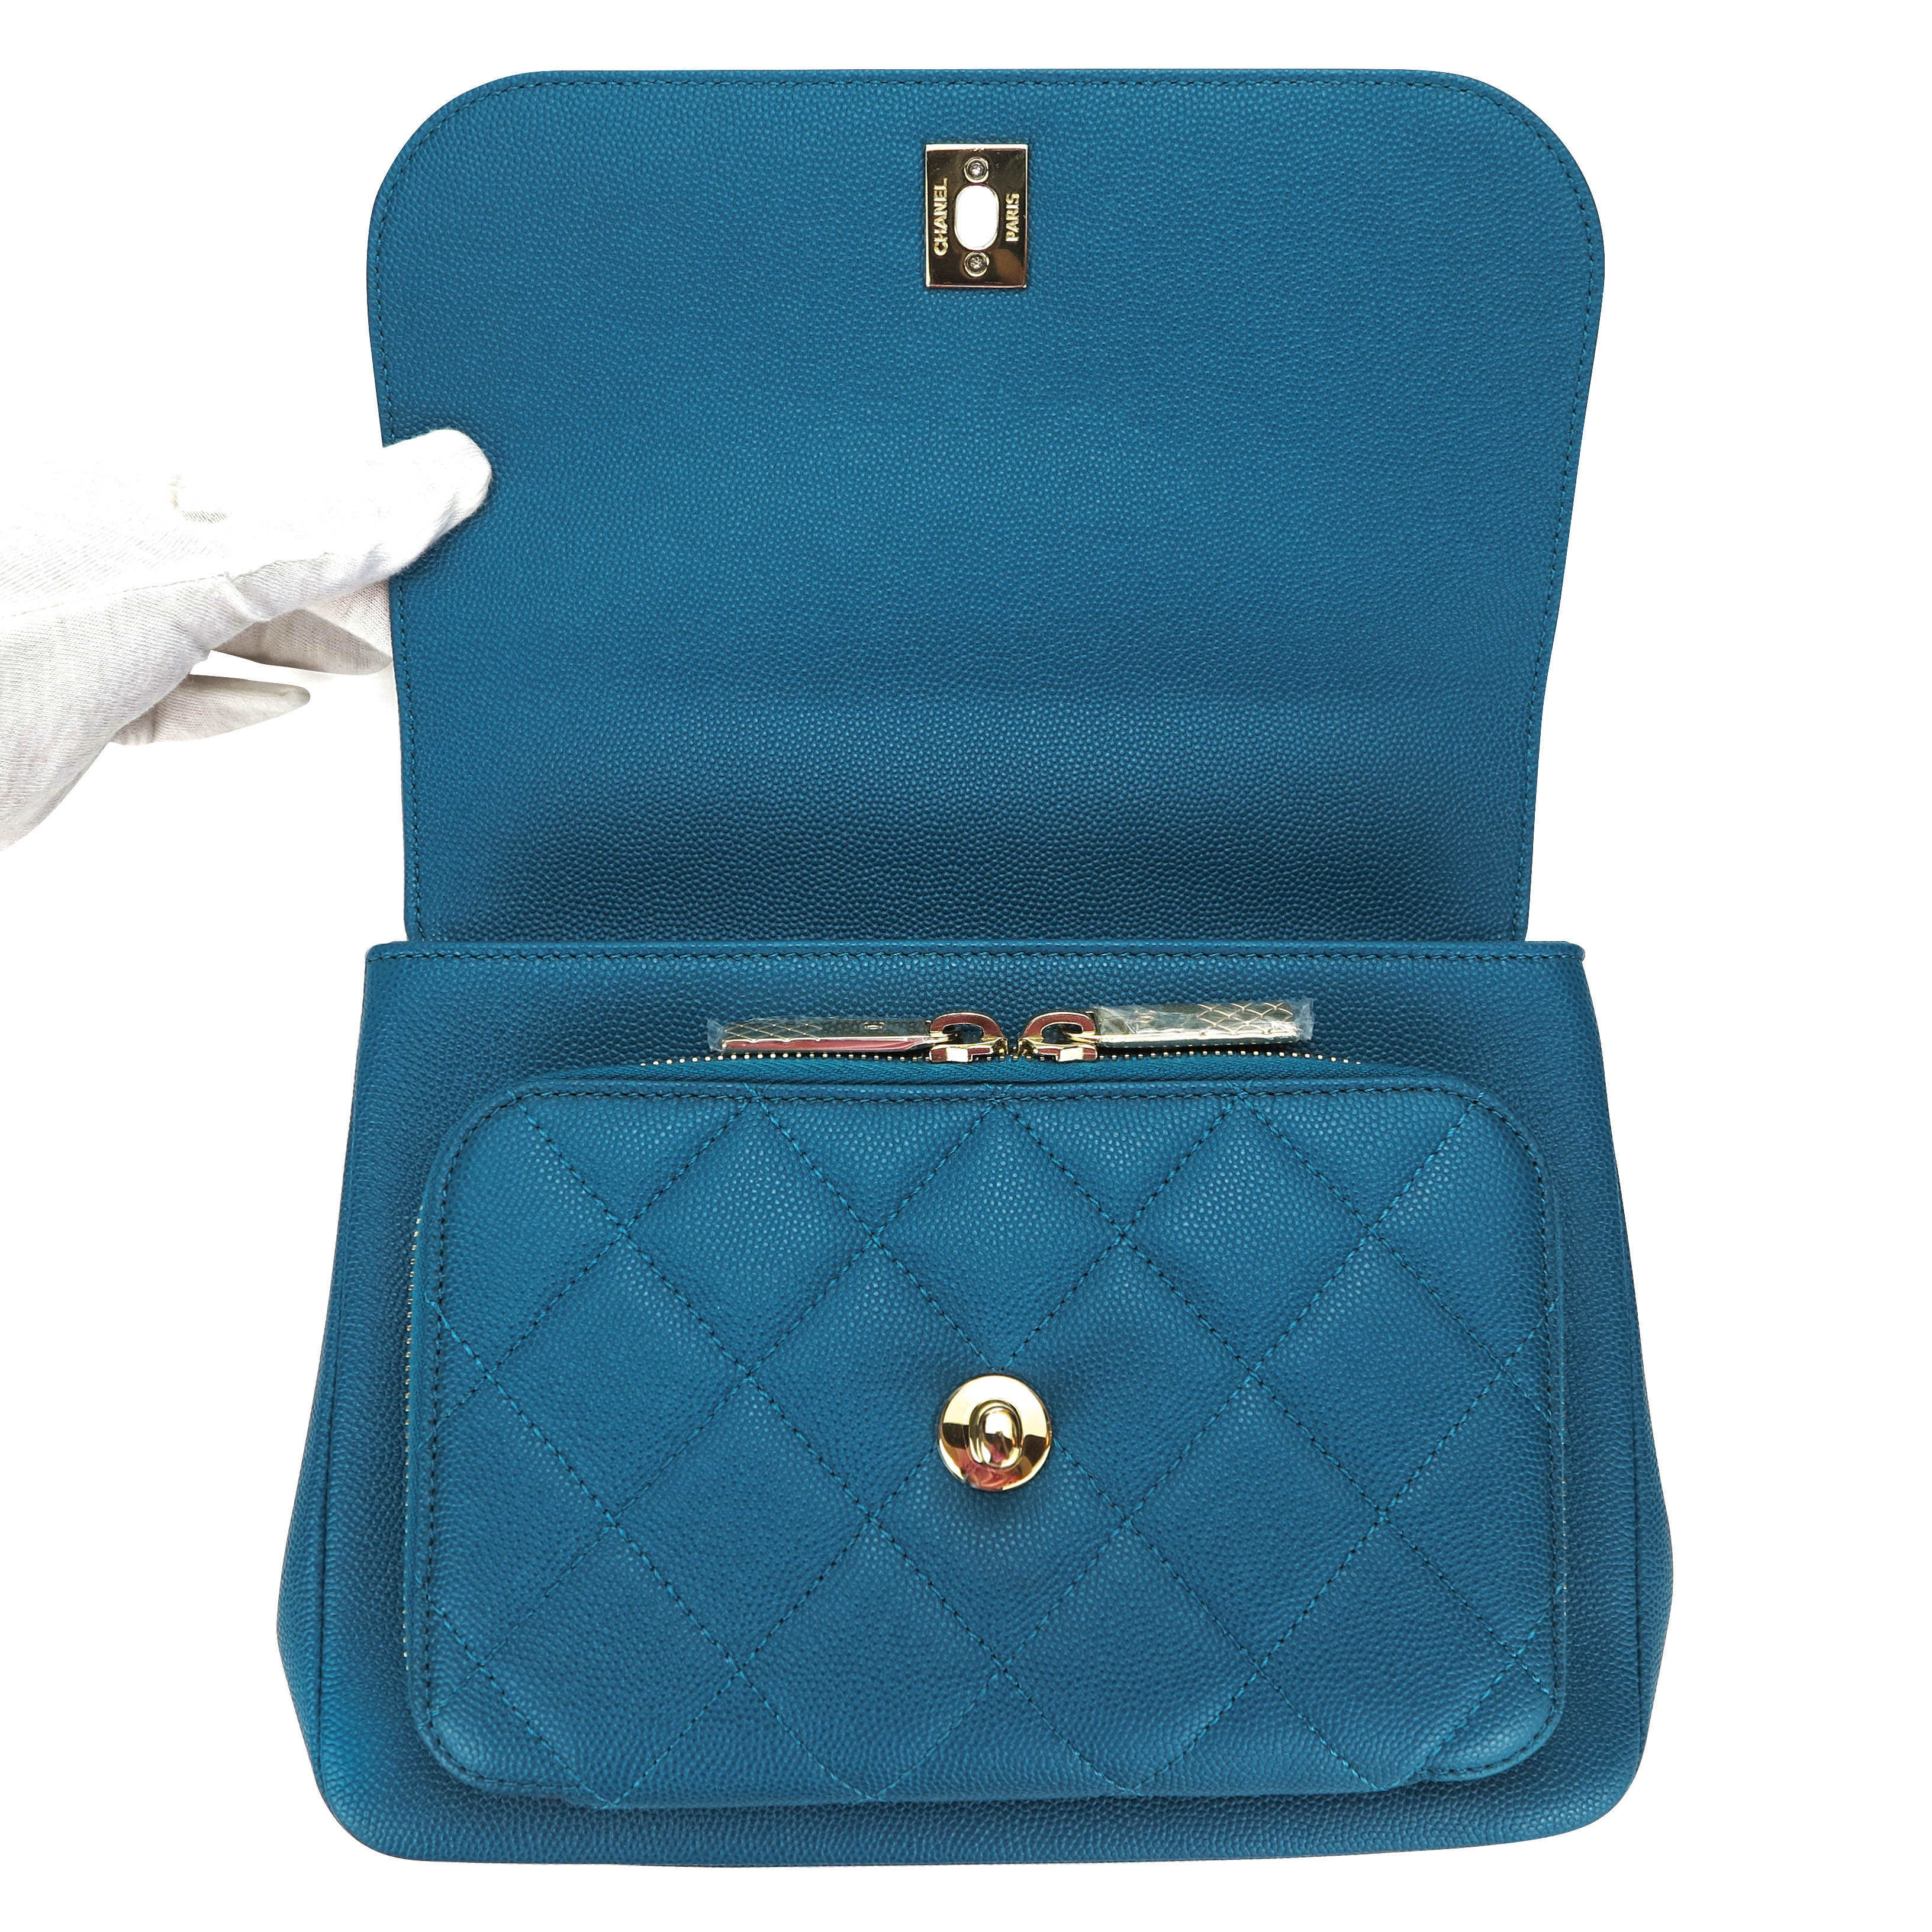 Medium Business Affinity Flap Bag in Turquoise Caviar